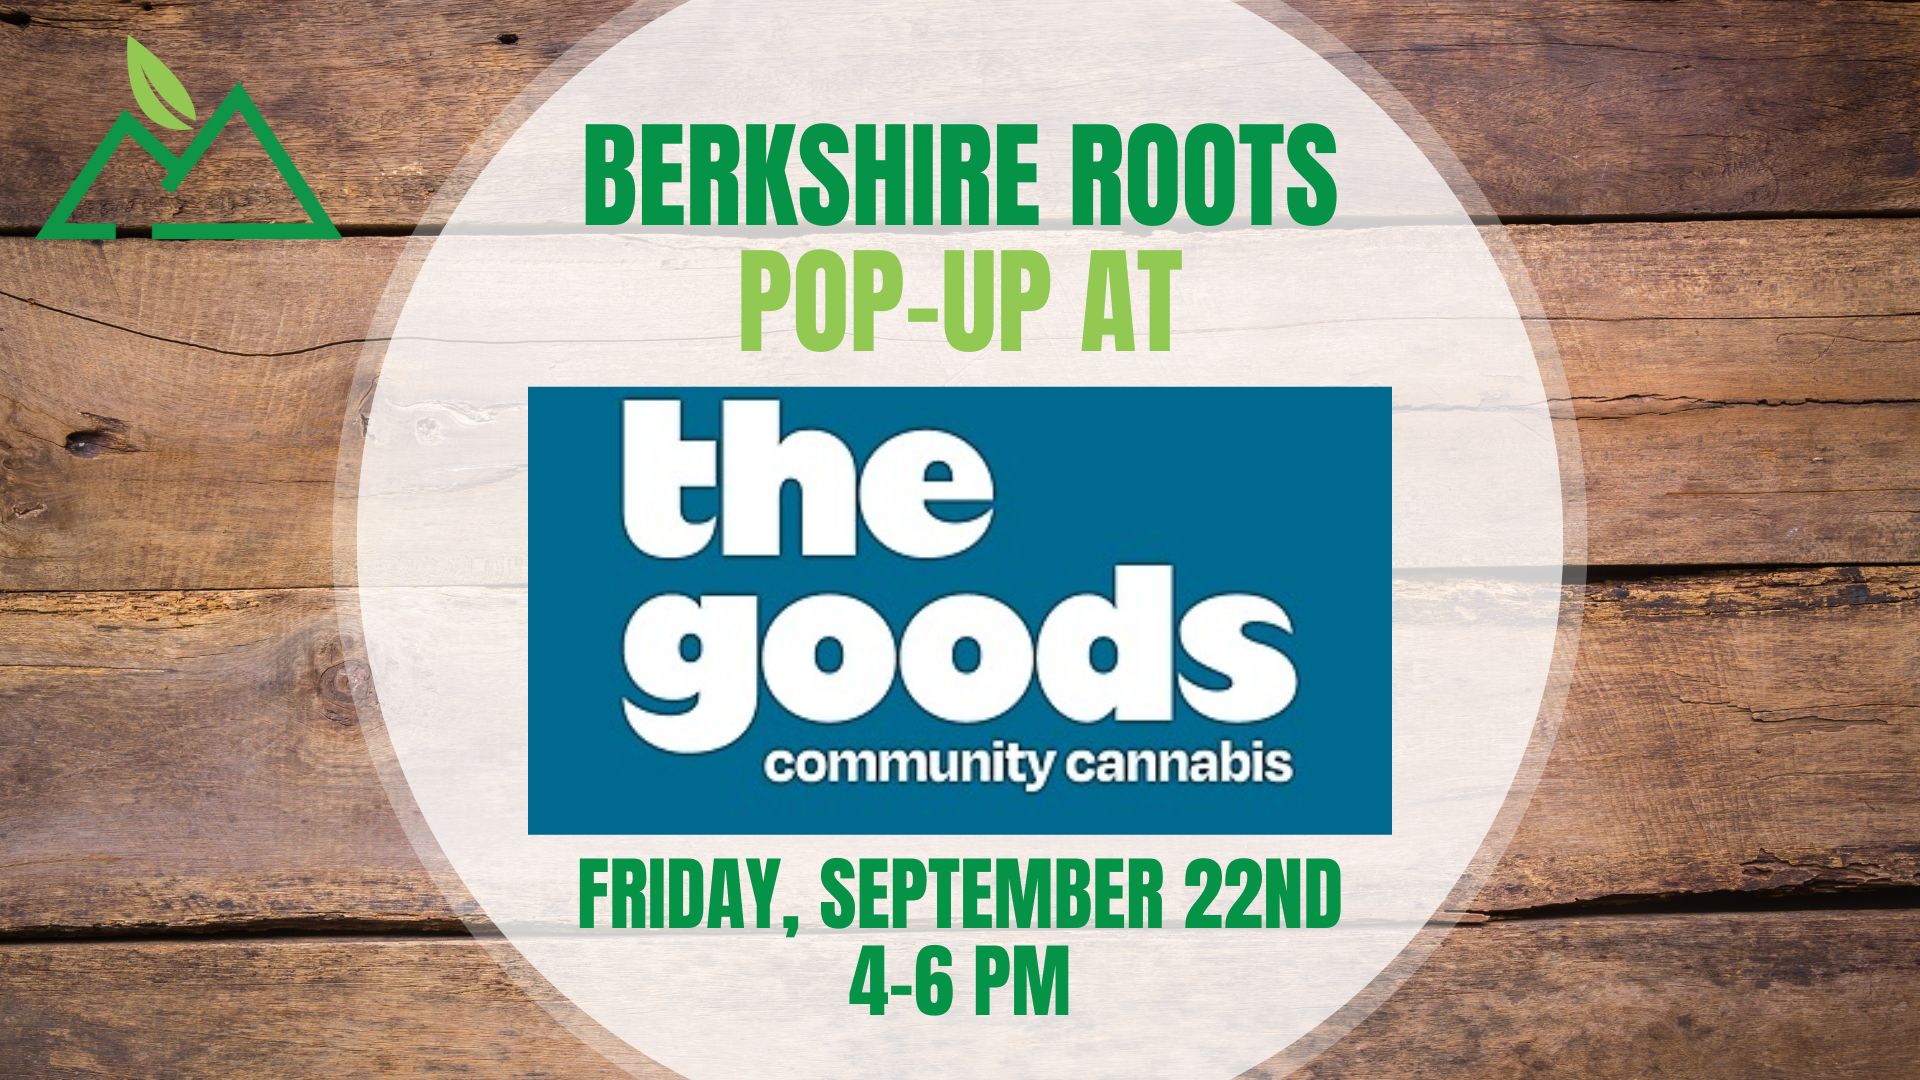 Berkshire Roots Pop Up at The Goods in Somerville